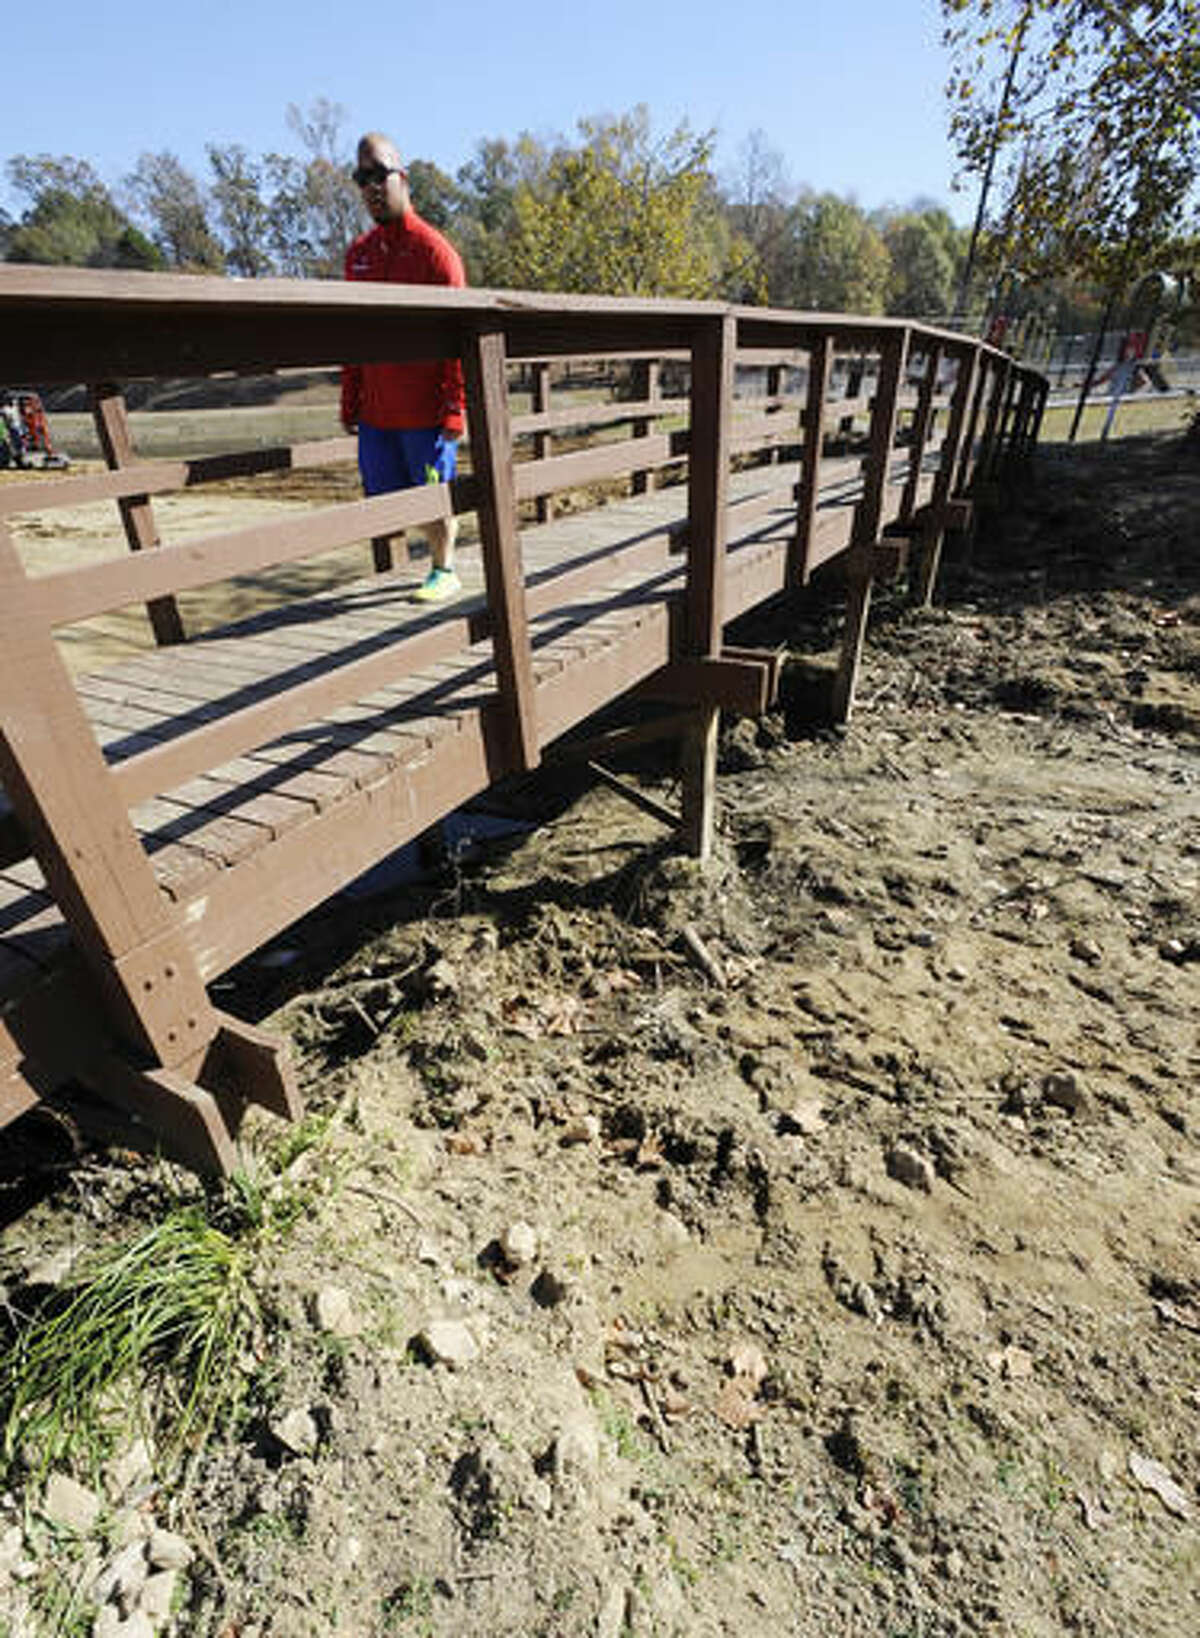 Chris Smith walks over a pond dried up by a worsening drought in Helena, Ala., on Thursday, Nov. 17, 2016. Federal statistics show nearly 90 percent of the state is now in a severe drought. And the U.S. Drought Monitor shows 65 percent of the state is in an extreme or exceptional drought. (AP Photo/Jay Reeves)